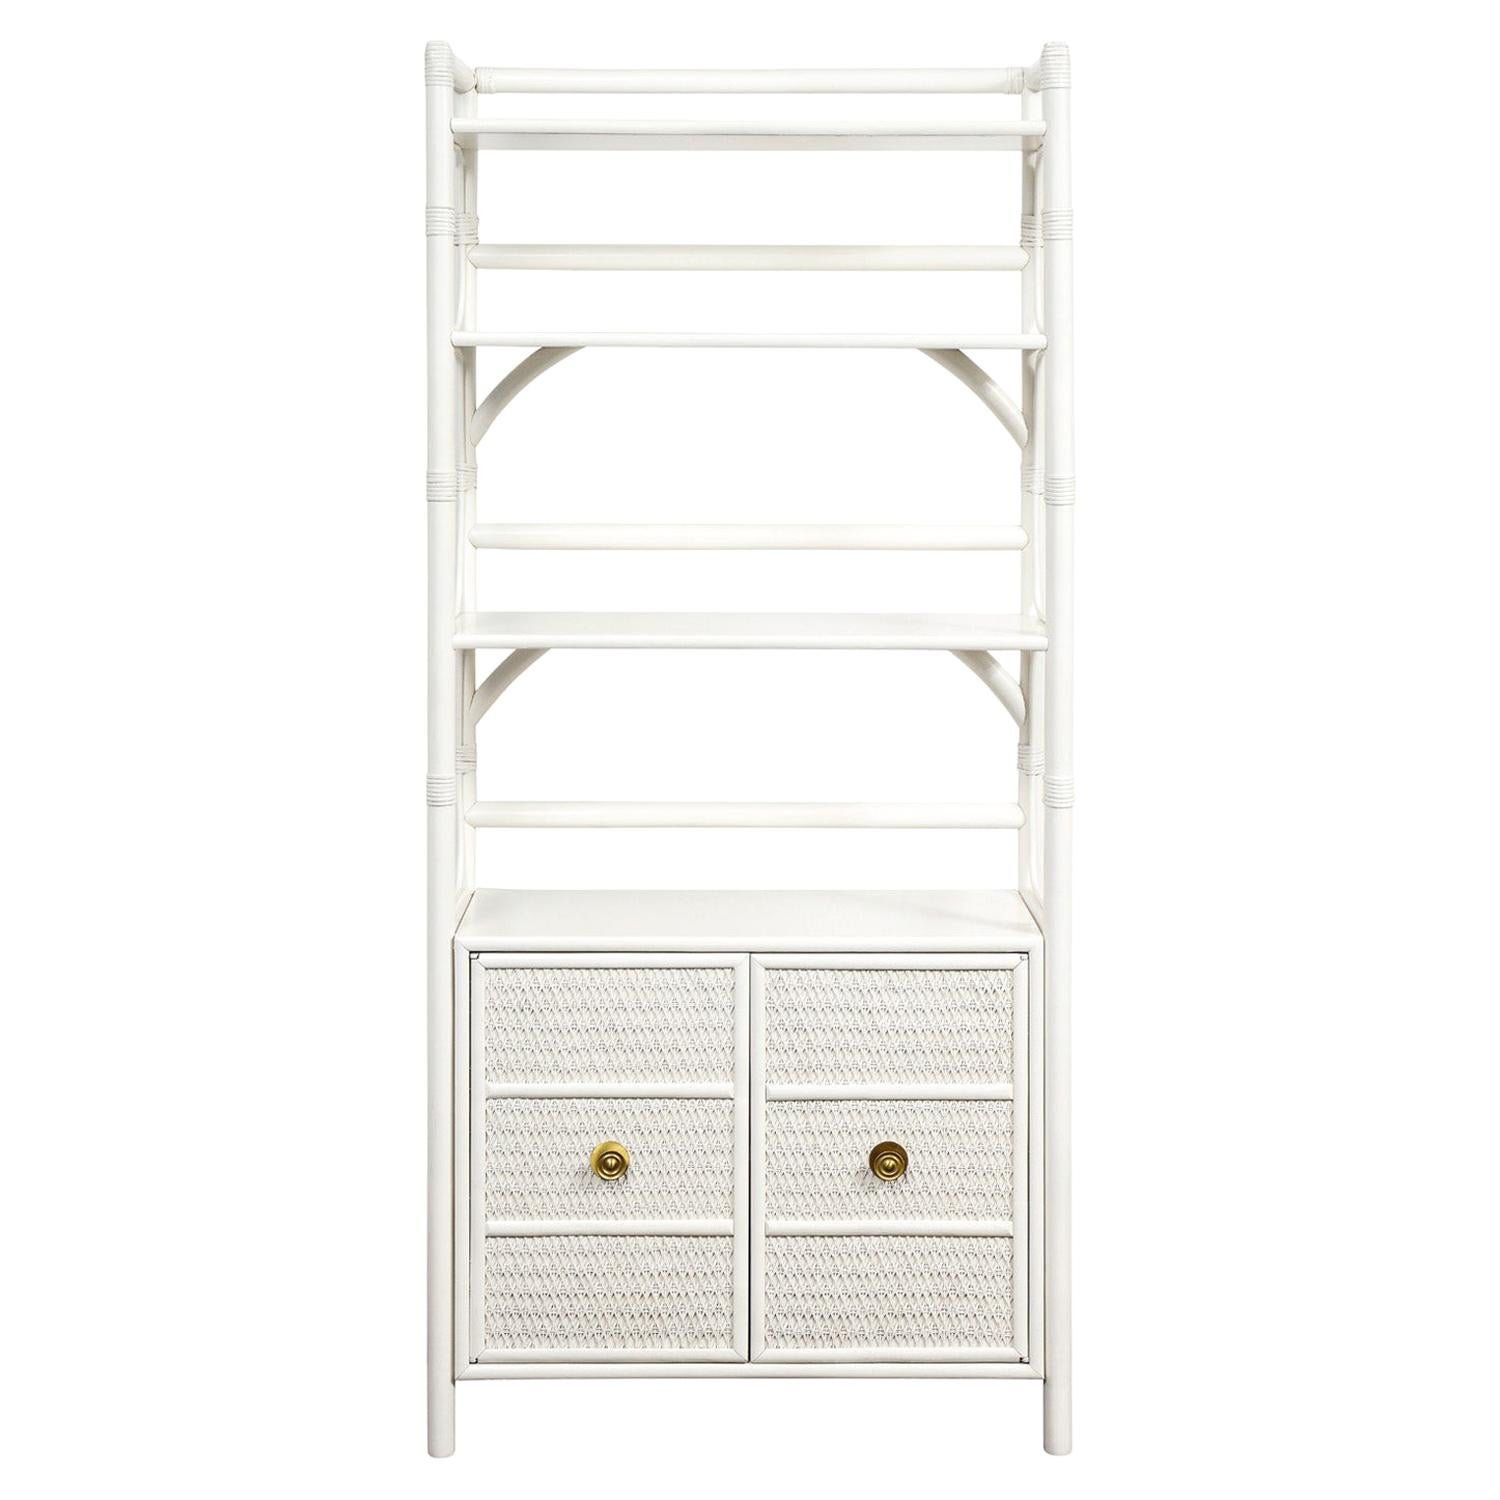 Tommi Parzinger White Lacquered Etagere With Brass Pulls, 1950s